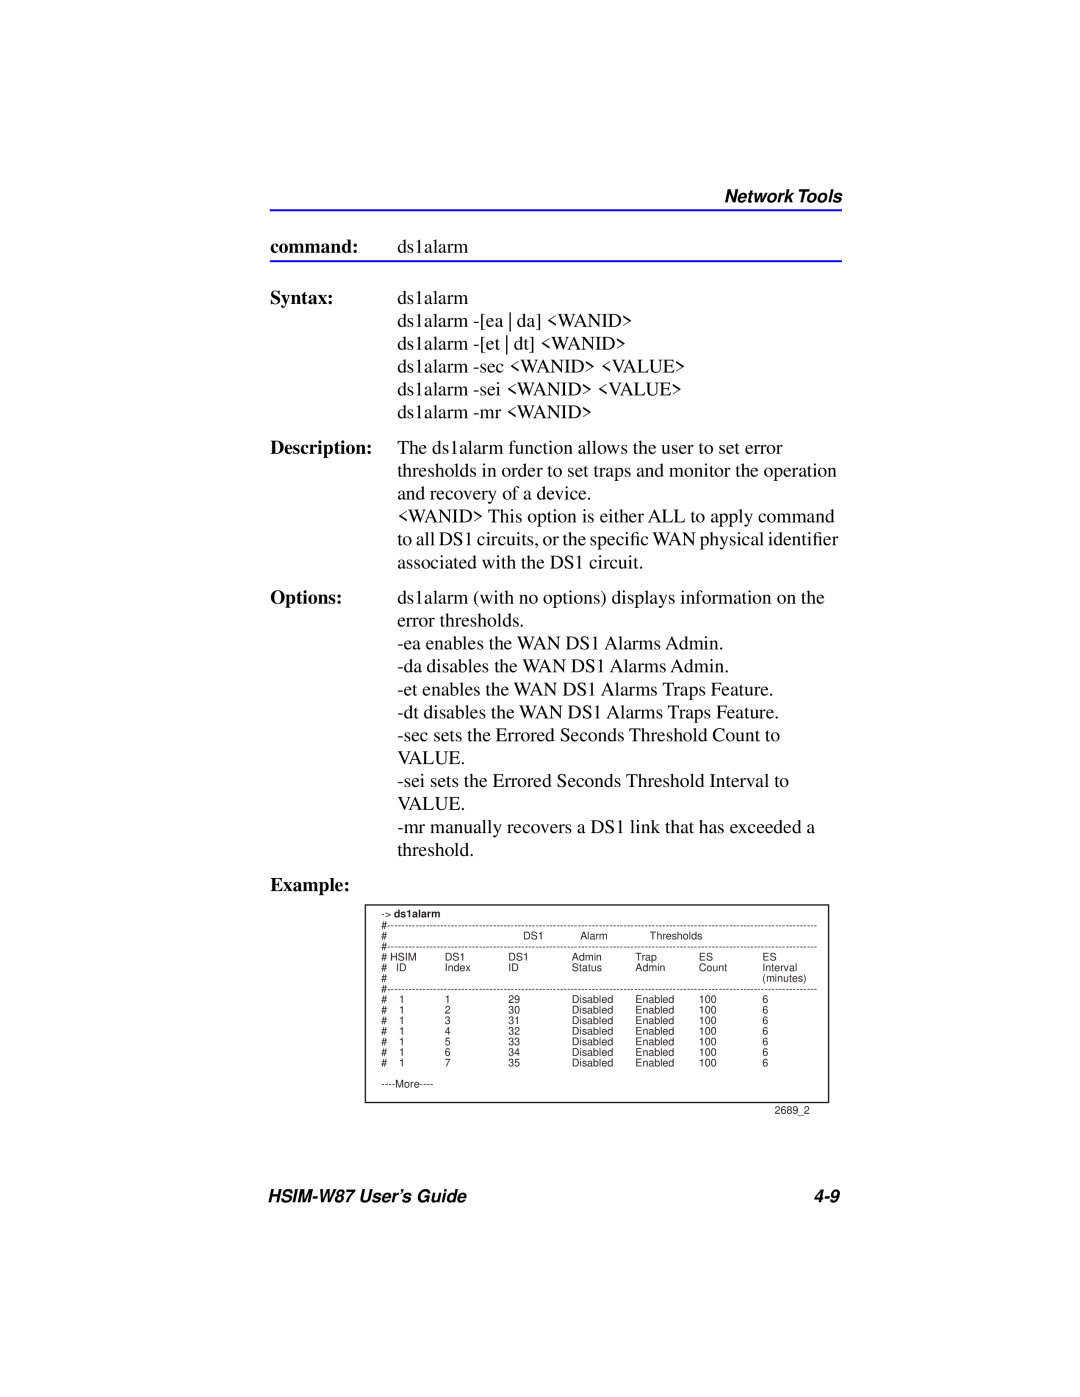 Cabletron Systems HSIM-W87 manual command ds1alarm Syntax ds1alarm, Example 